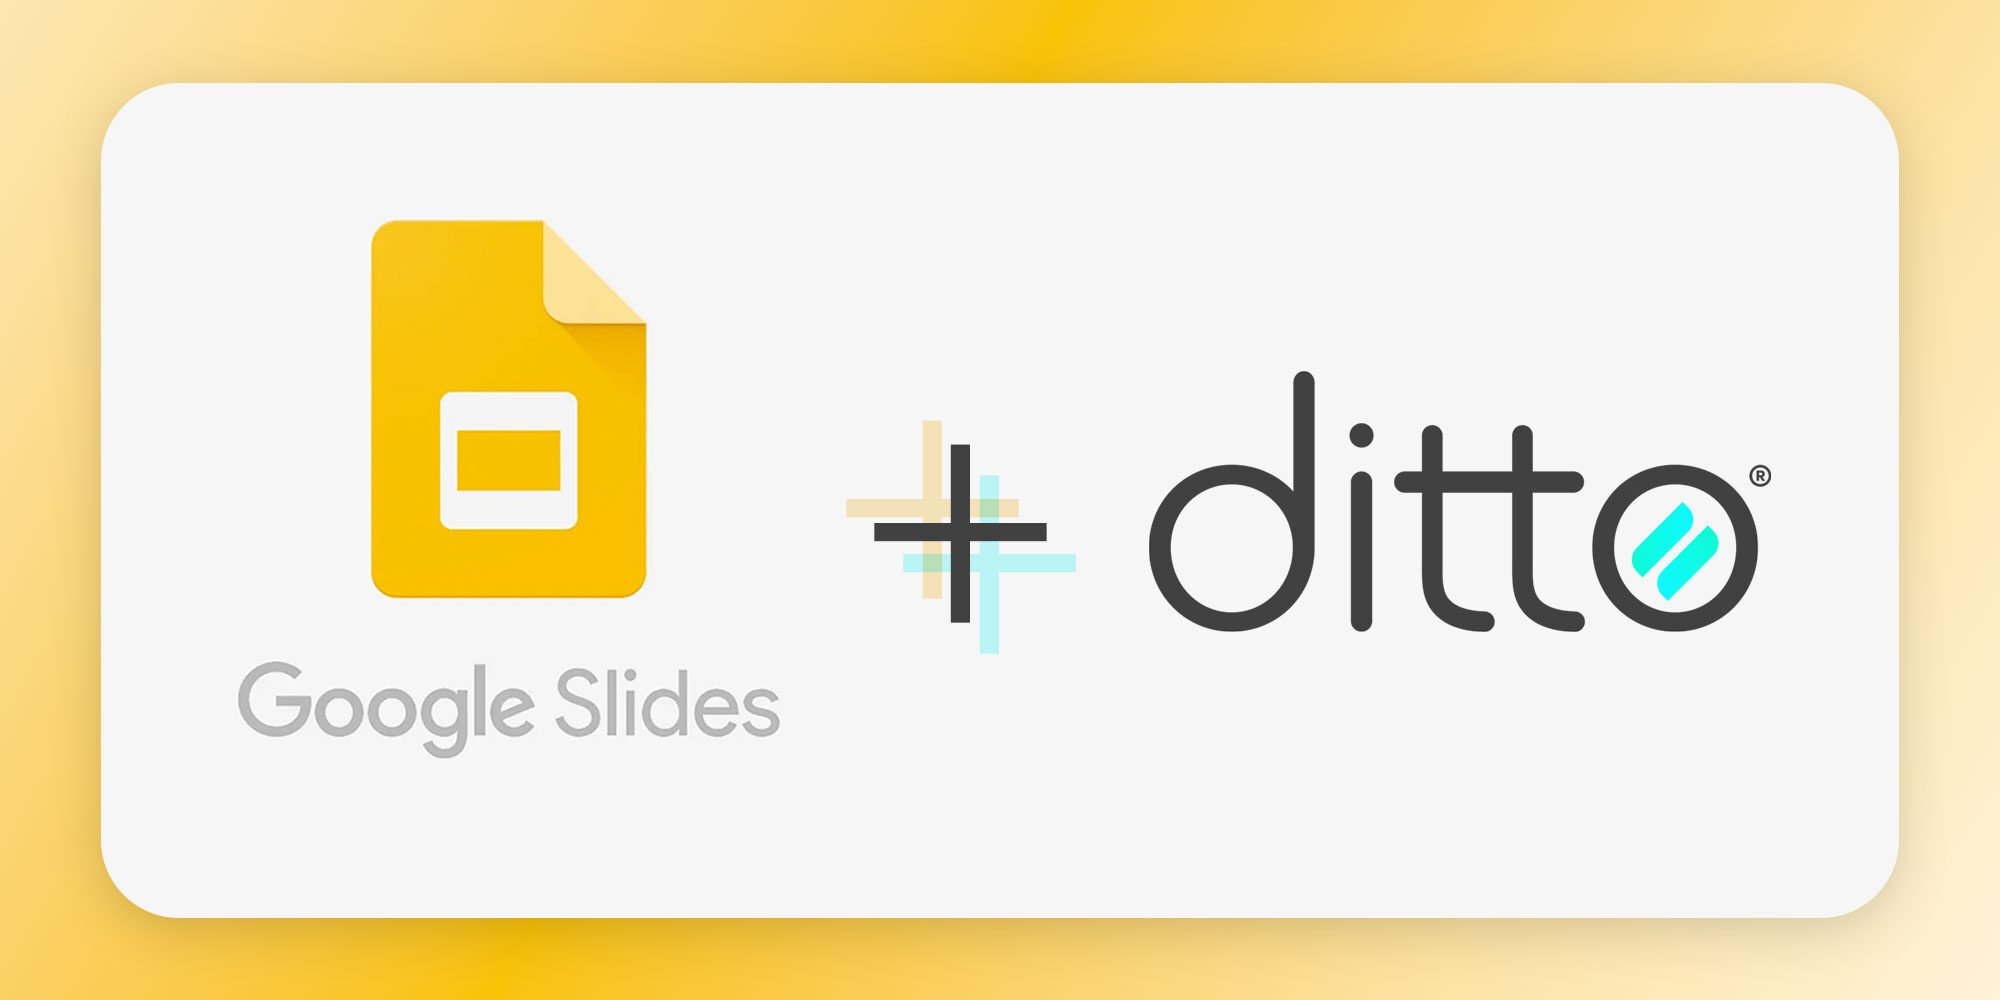 Ditto and Google Slides logos together